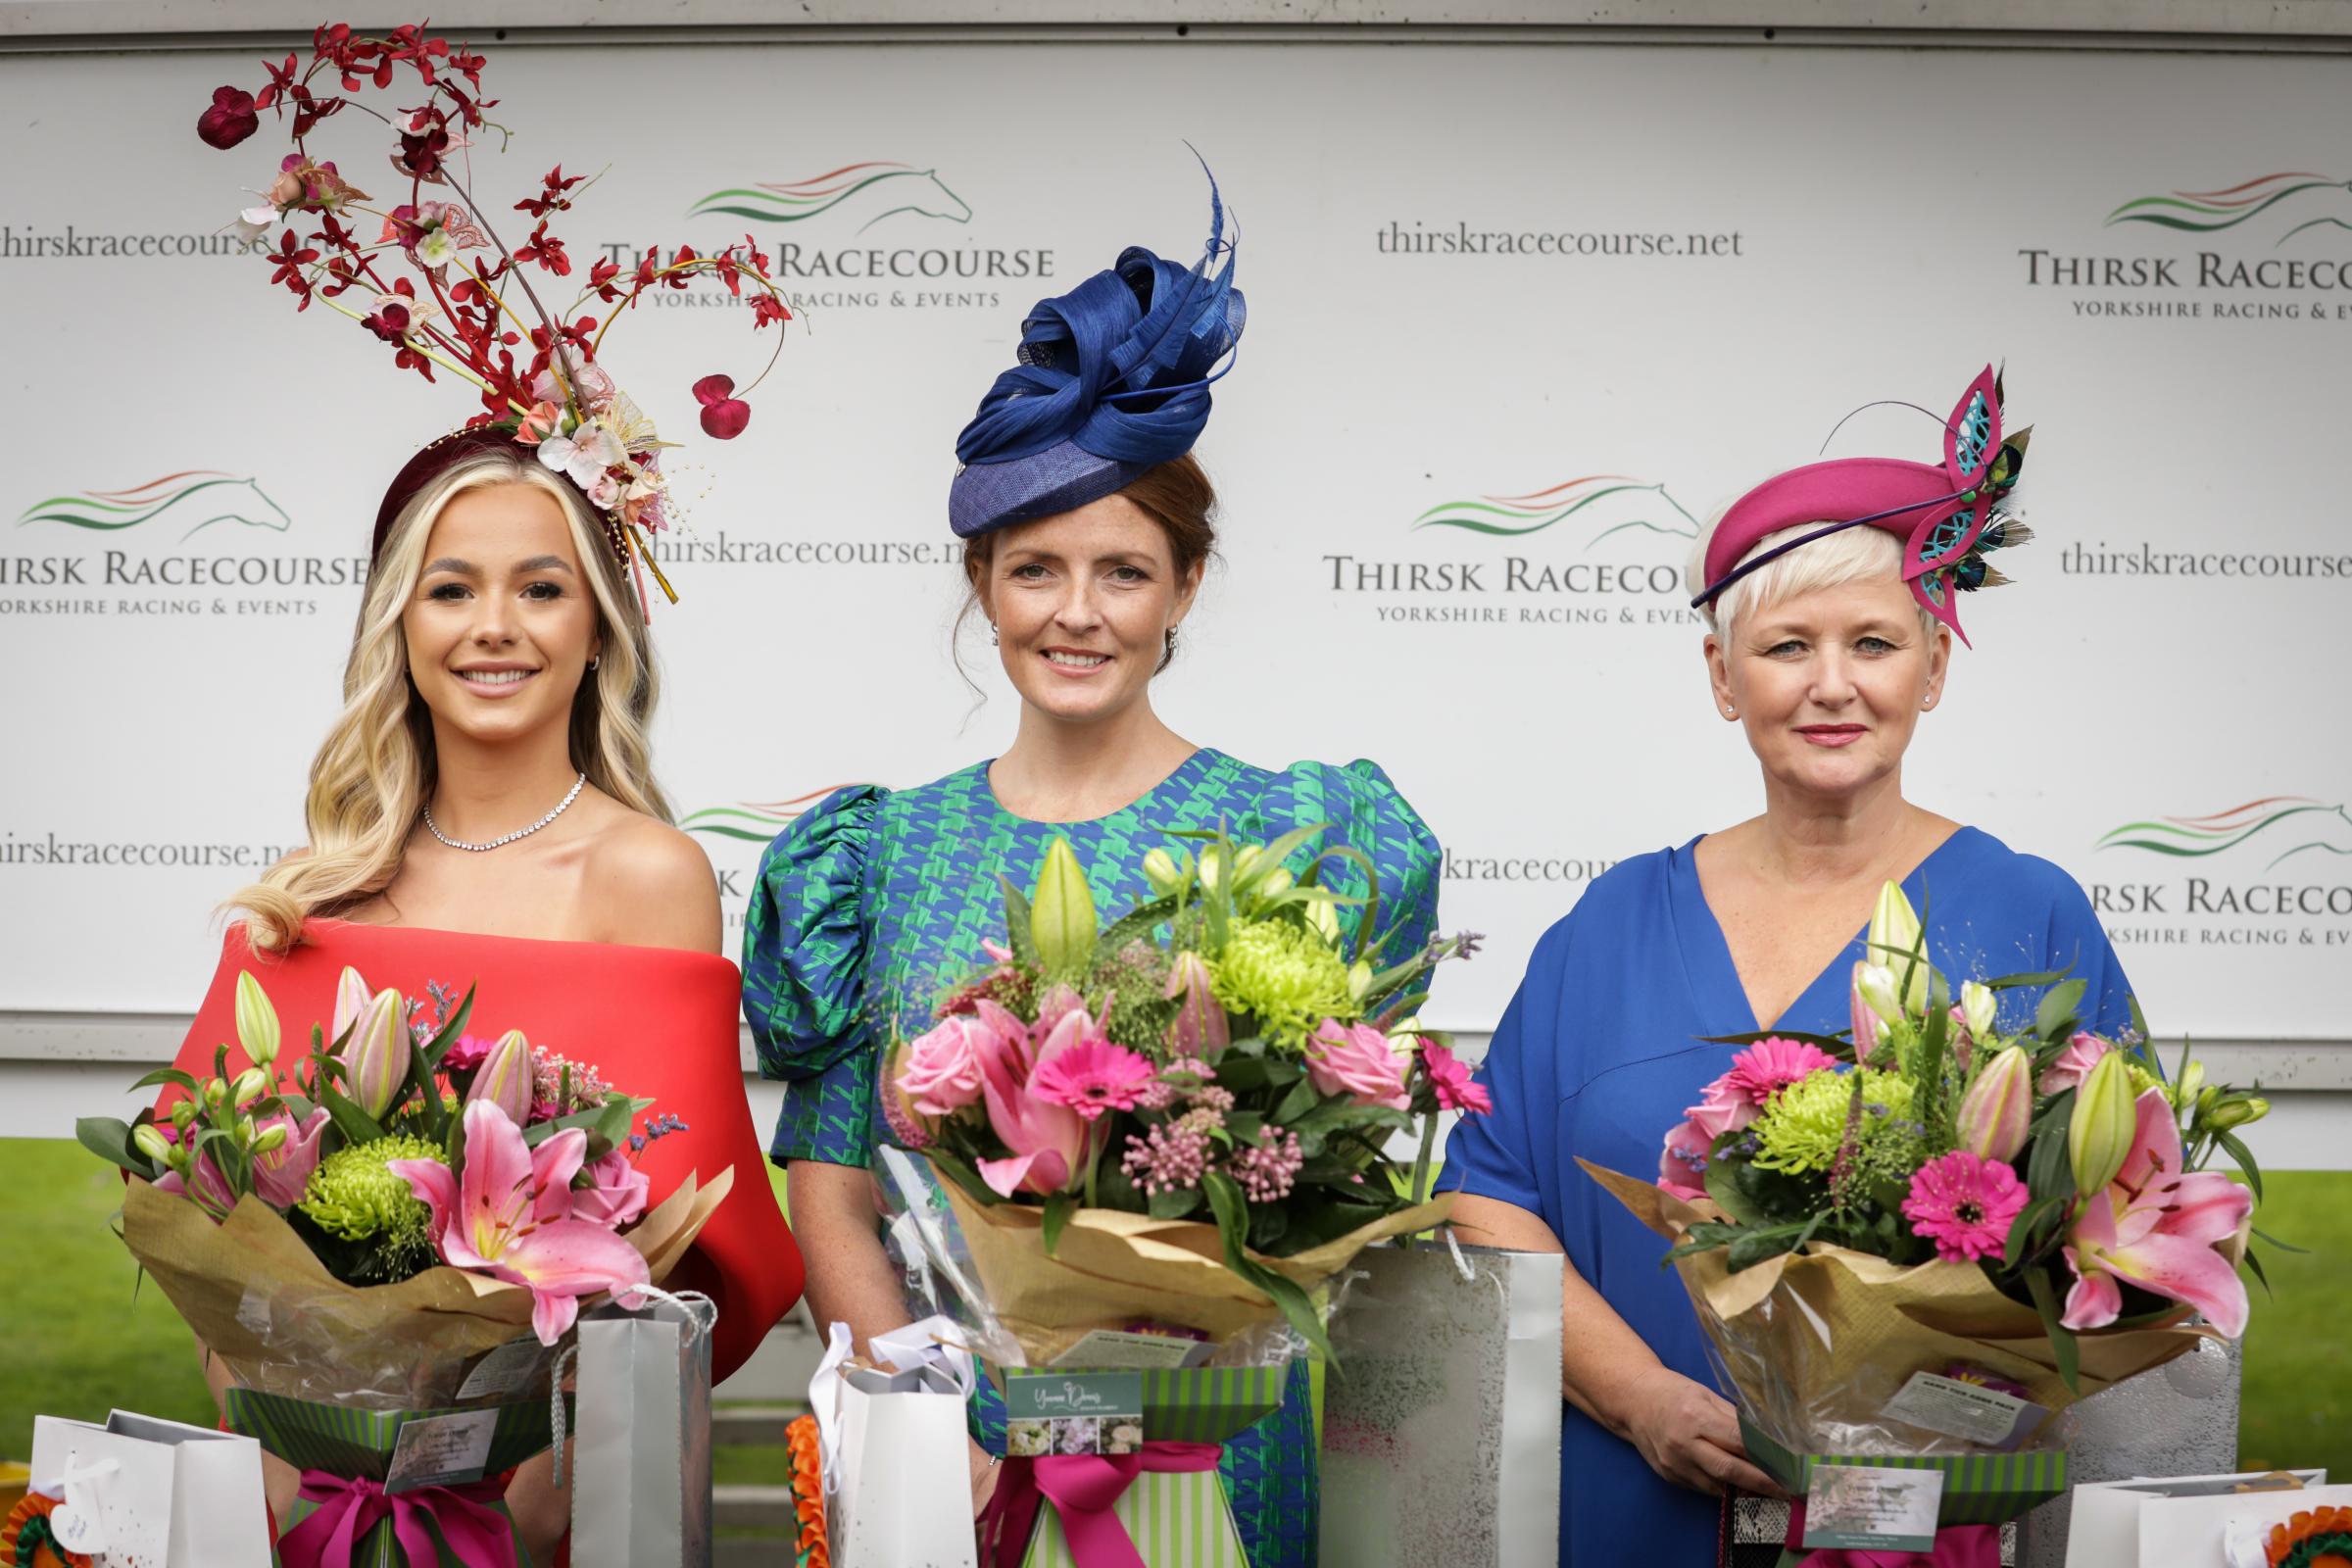 Ladies Day takes place at Thirsk on September 3